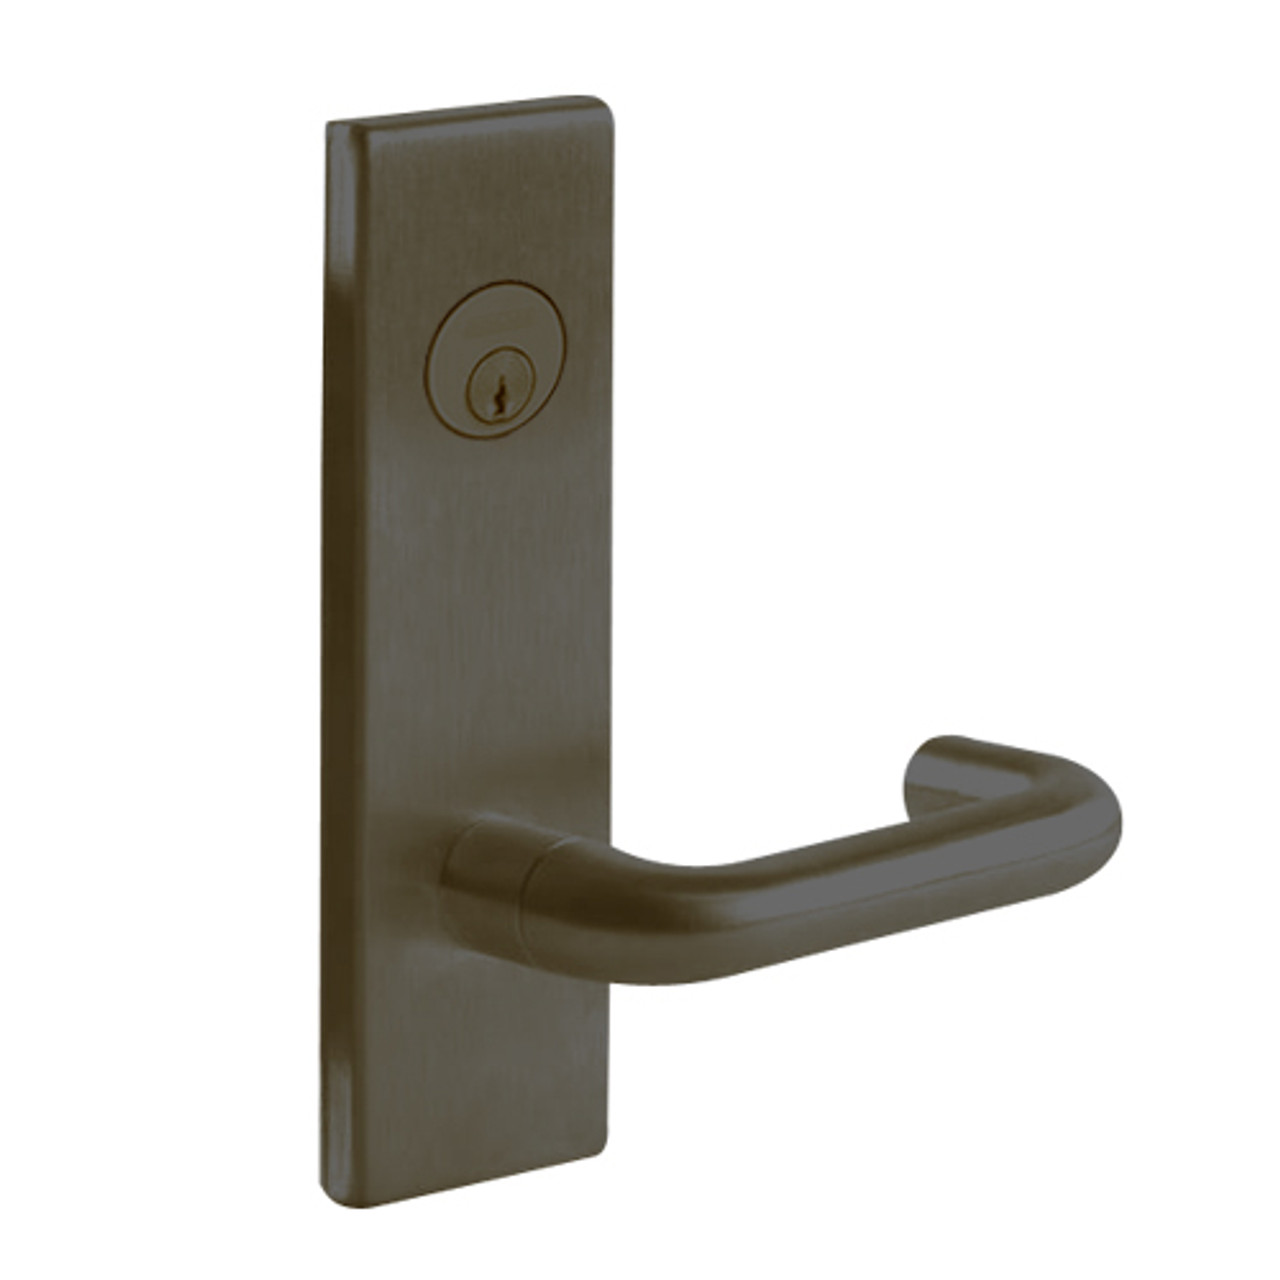 L9026L-03N-613 Schlage L Series Less Cylinder Exit Lock with Cylinder Commercial Mortise Lock with 03 Cast Lever Design in Oil Rubbed Bronze